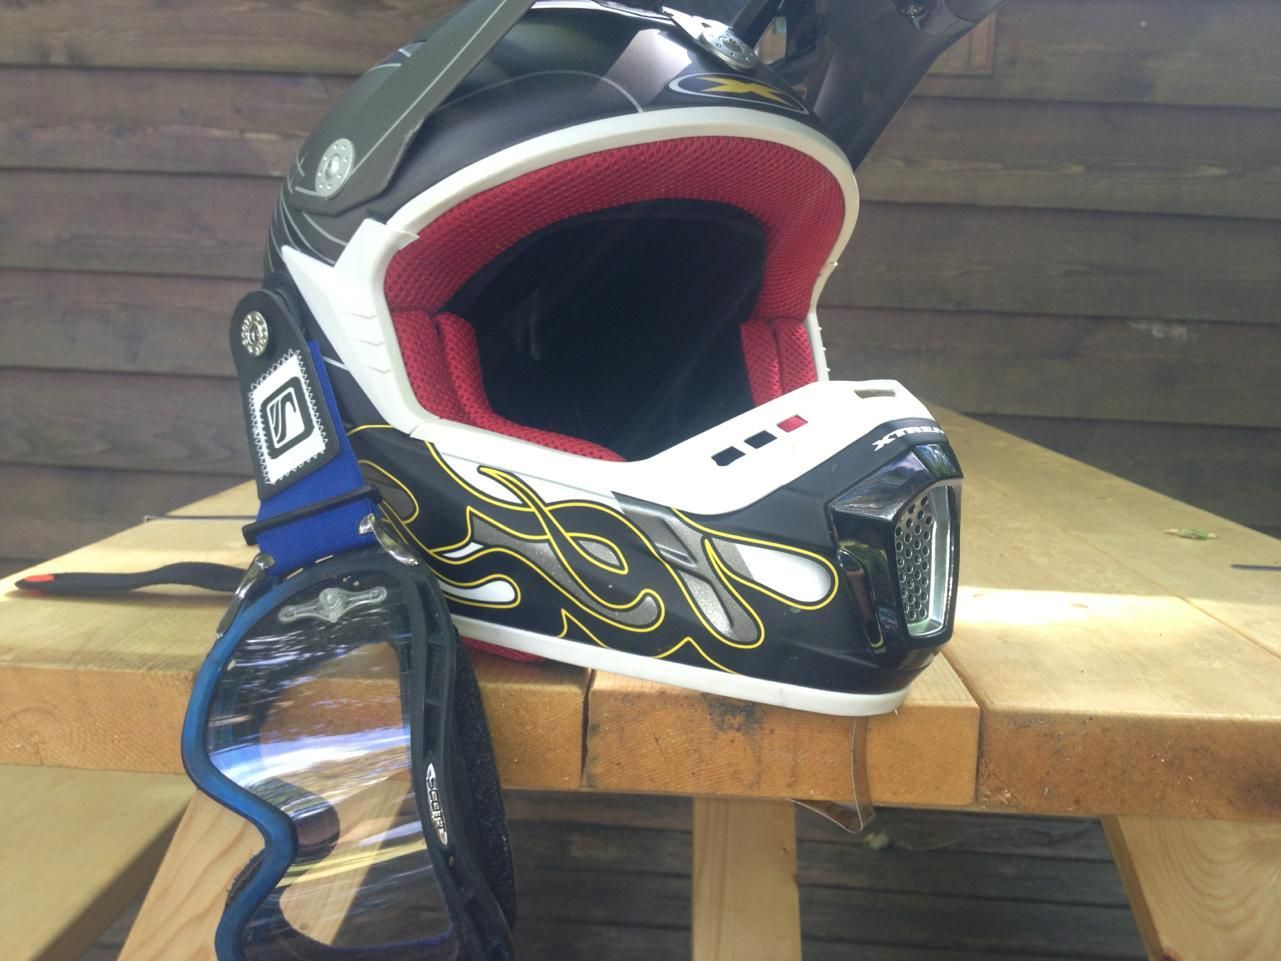 Scott quick release goggles - no more dropping my goggles